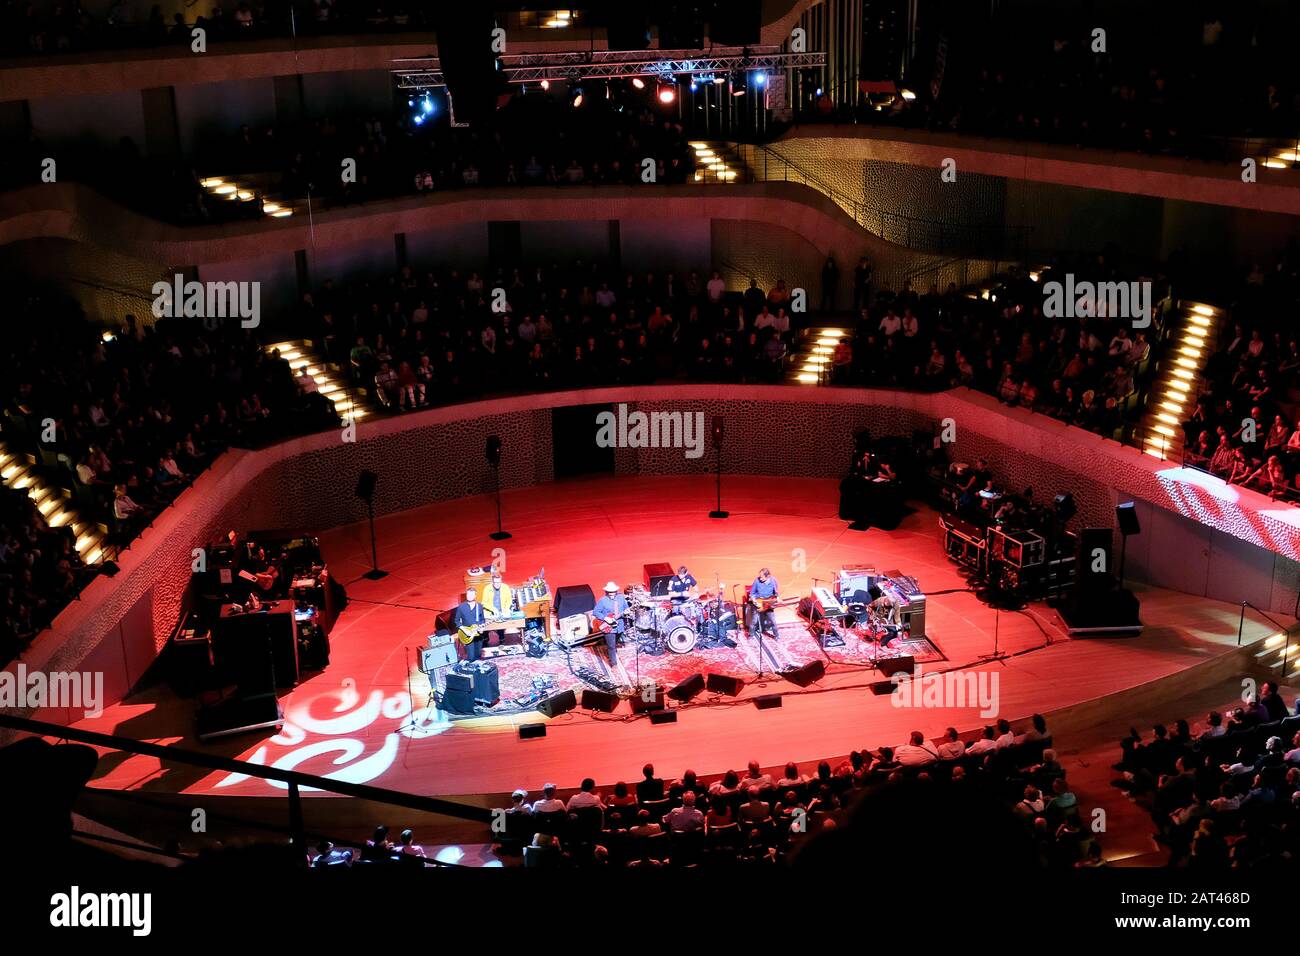 Concert of the american band Wilco in the Great Hall of the Konzerthaus Elbphilharmonie in the Hamburg Harbour, Hamburg, Germany Stock Photo